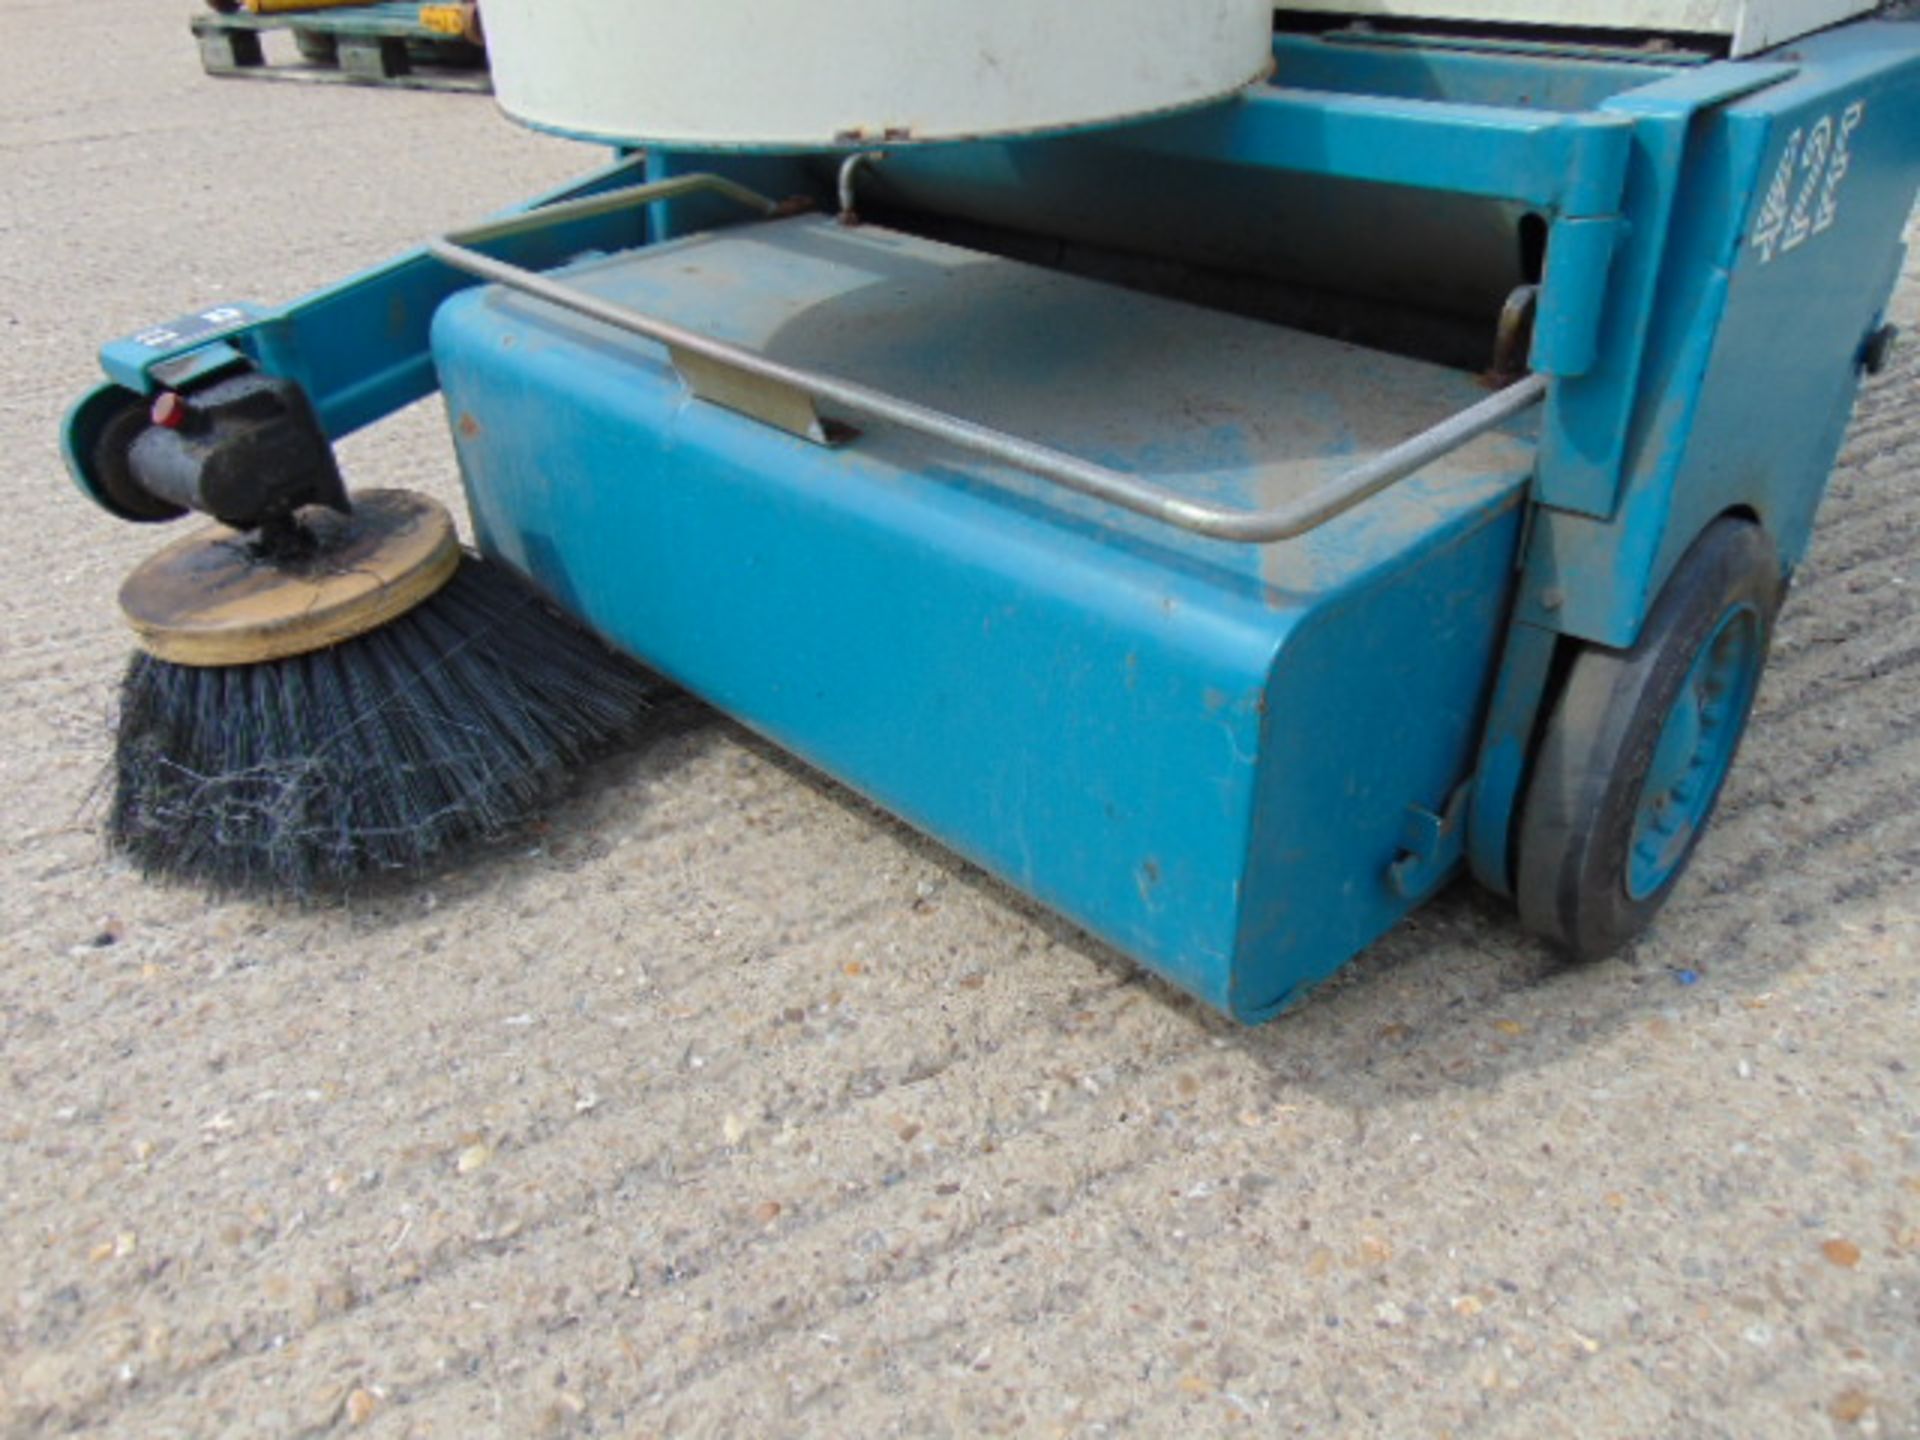 Tennant 42E Walk Behind Electric Sweeper - Image 5 of 7